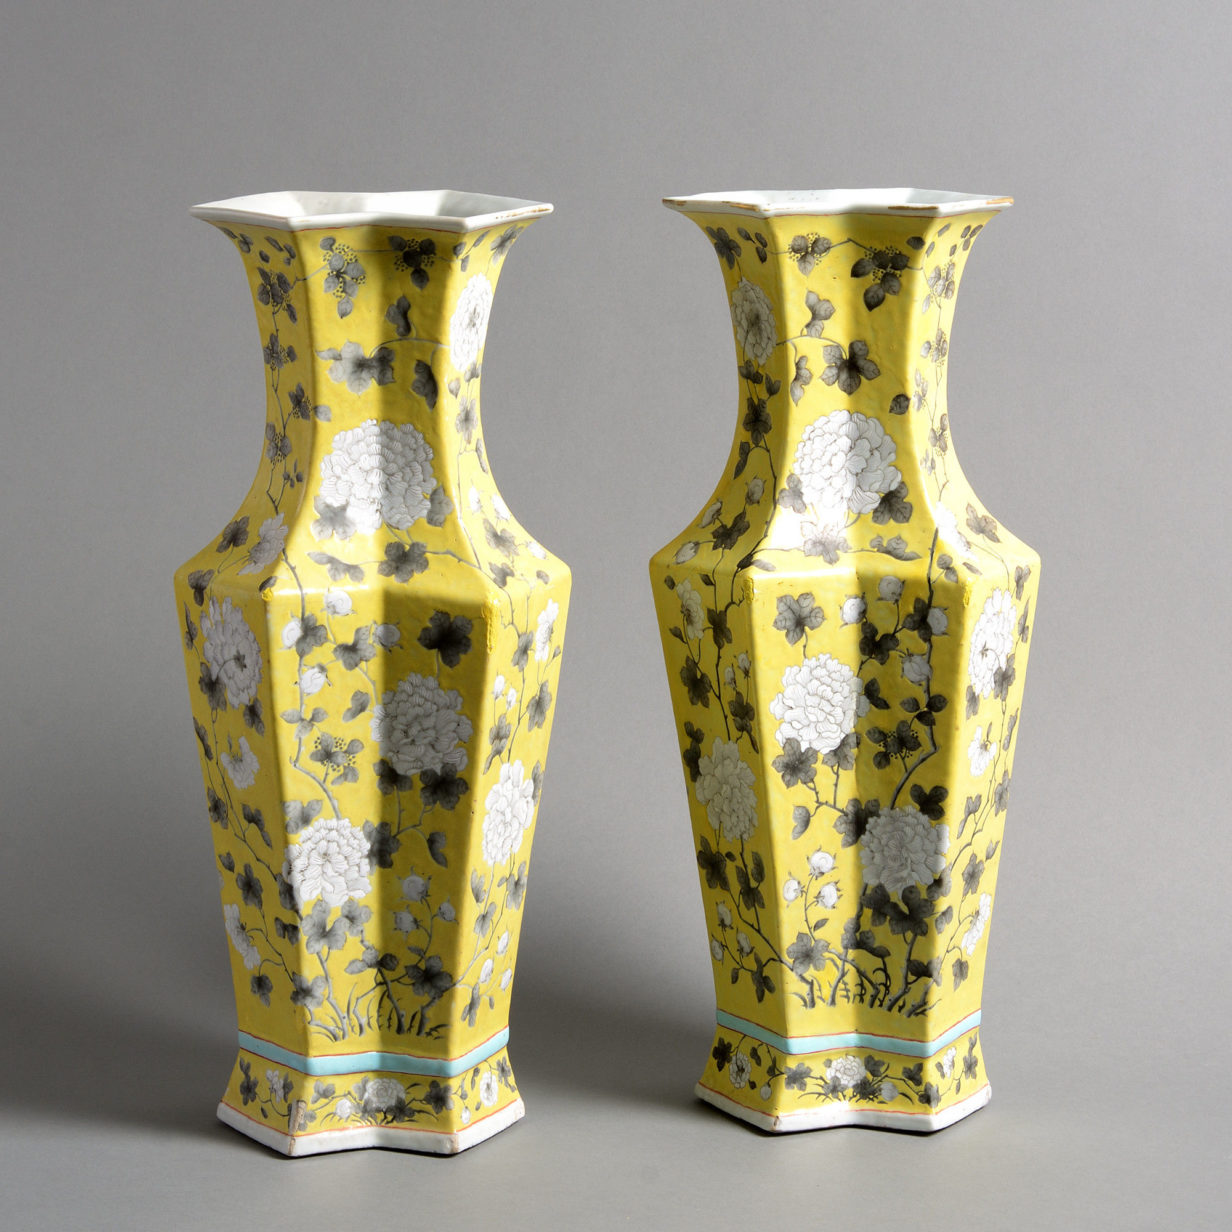 A rare pair of 19th century qing dynasty yellow glazed tall vases